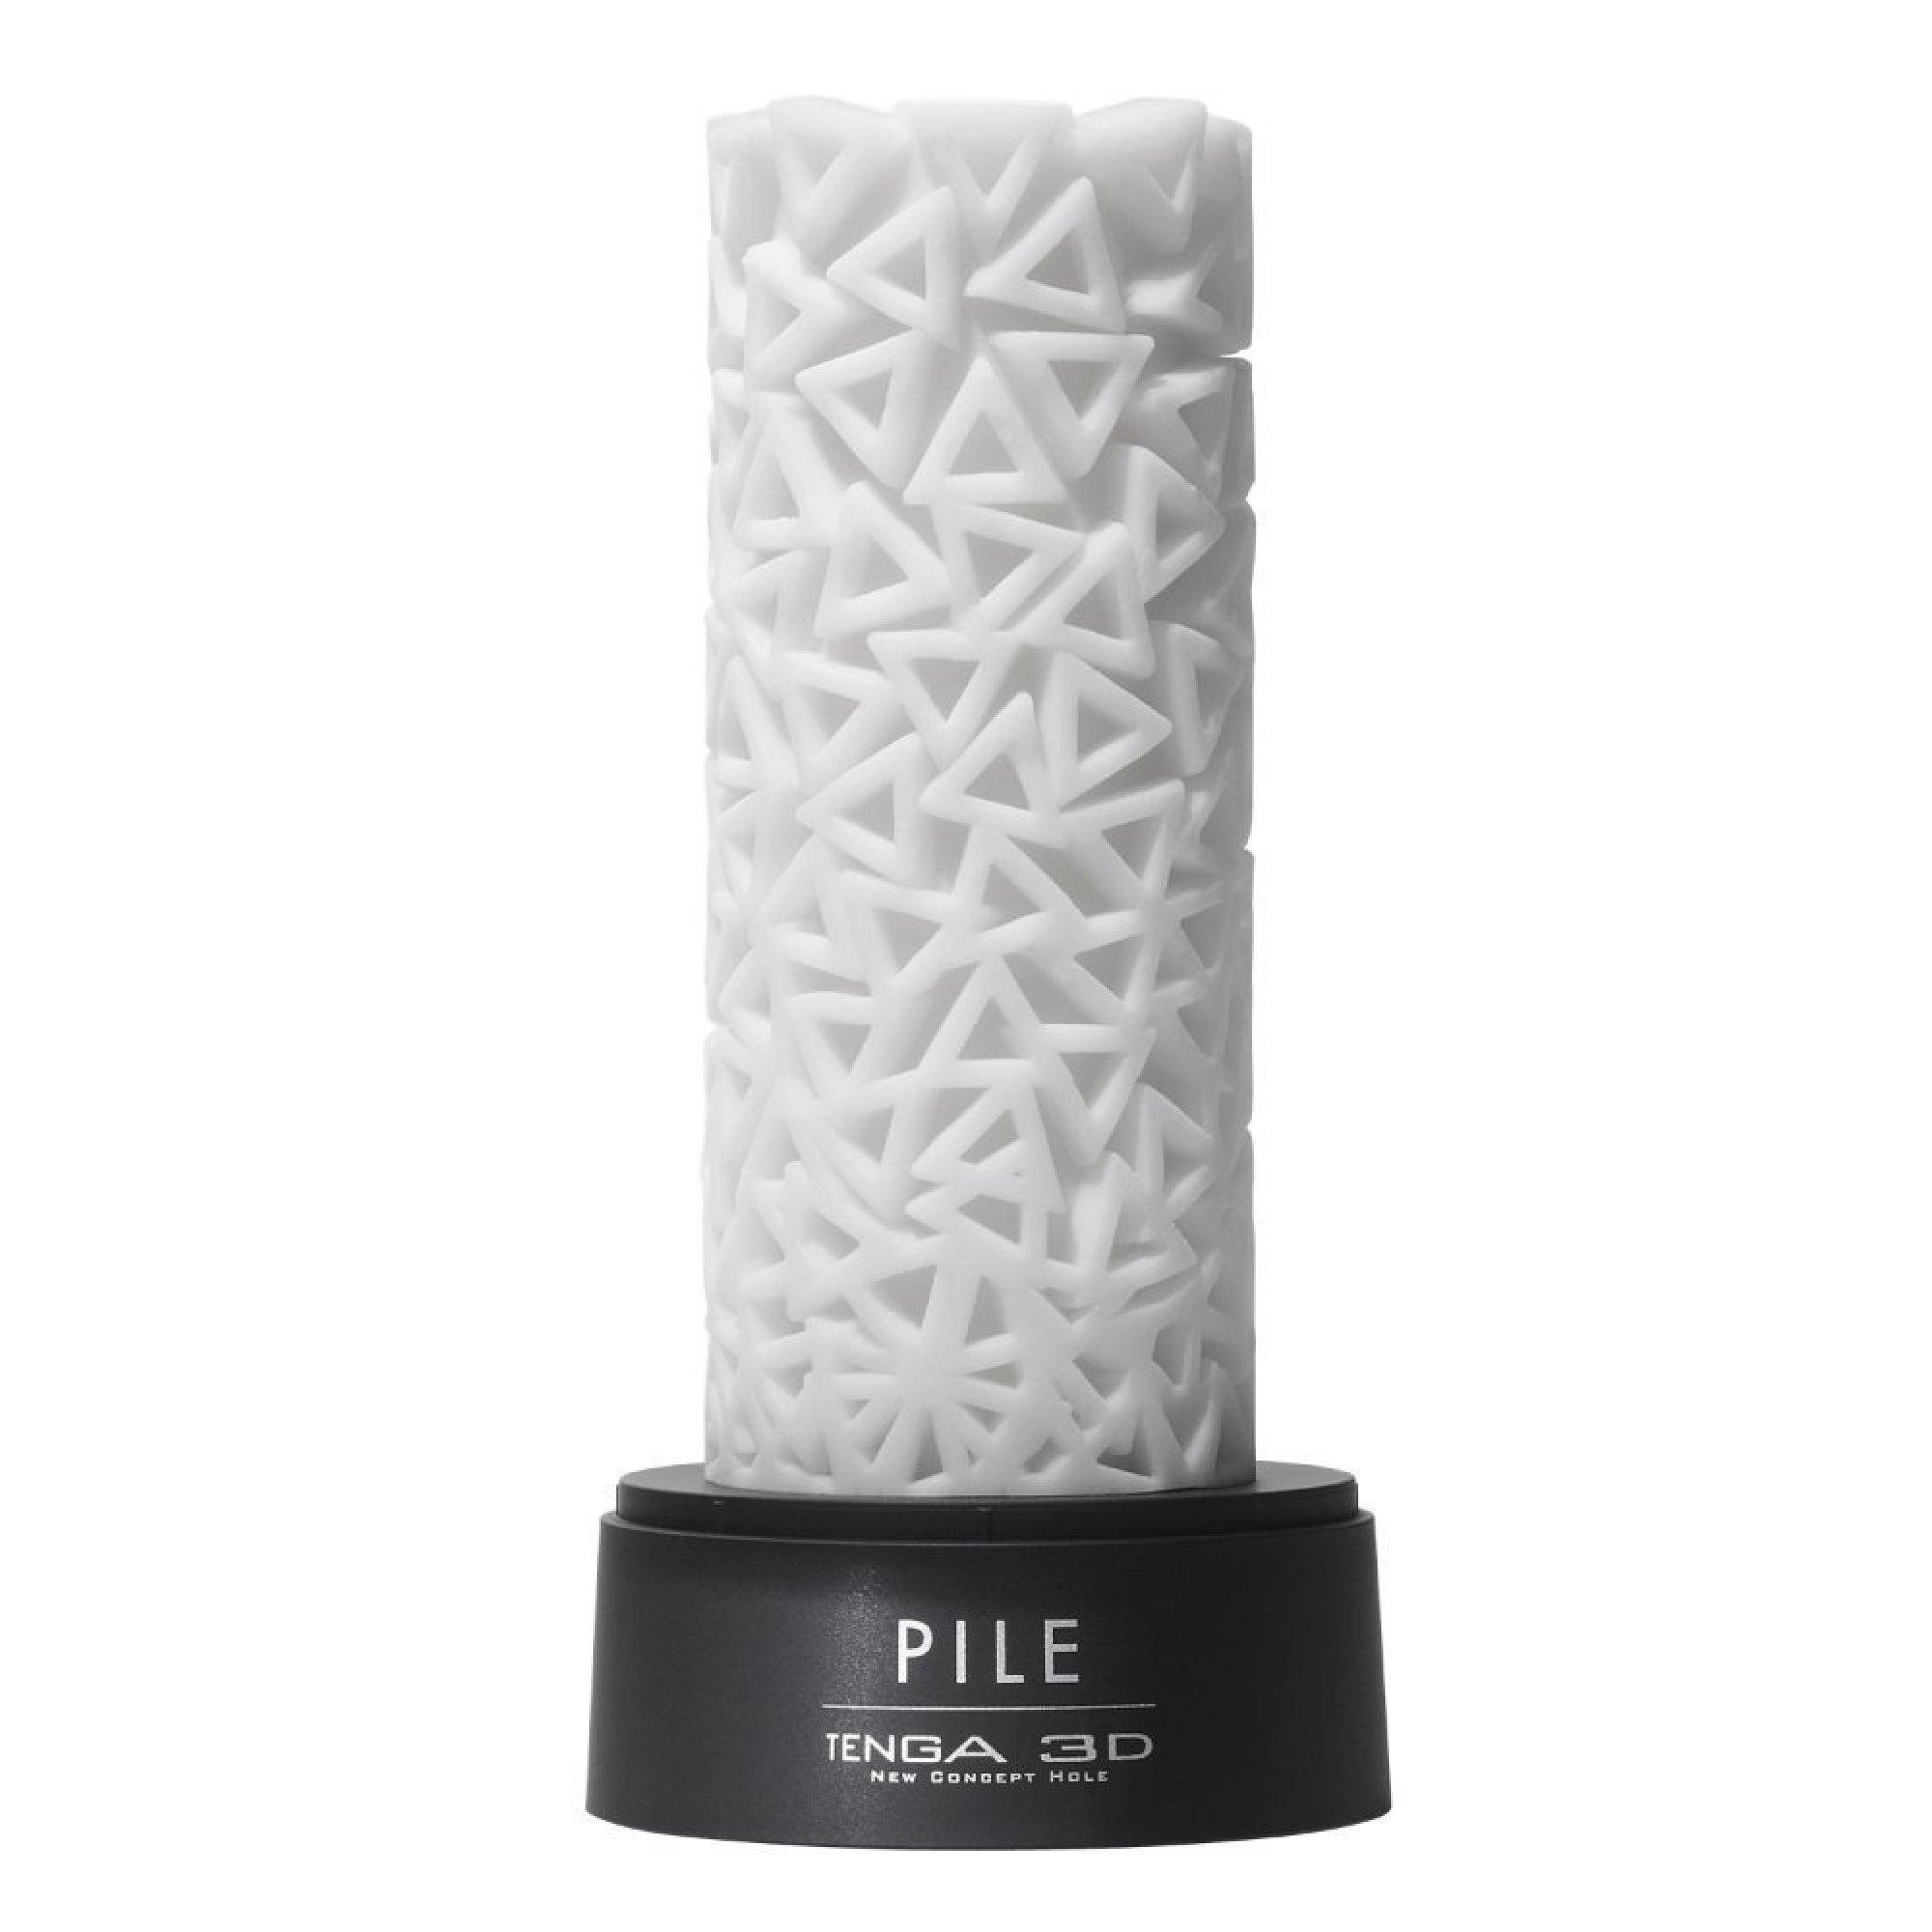 Image of Tenga 3D Pile - ONE SIZE